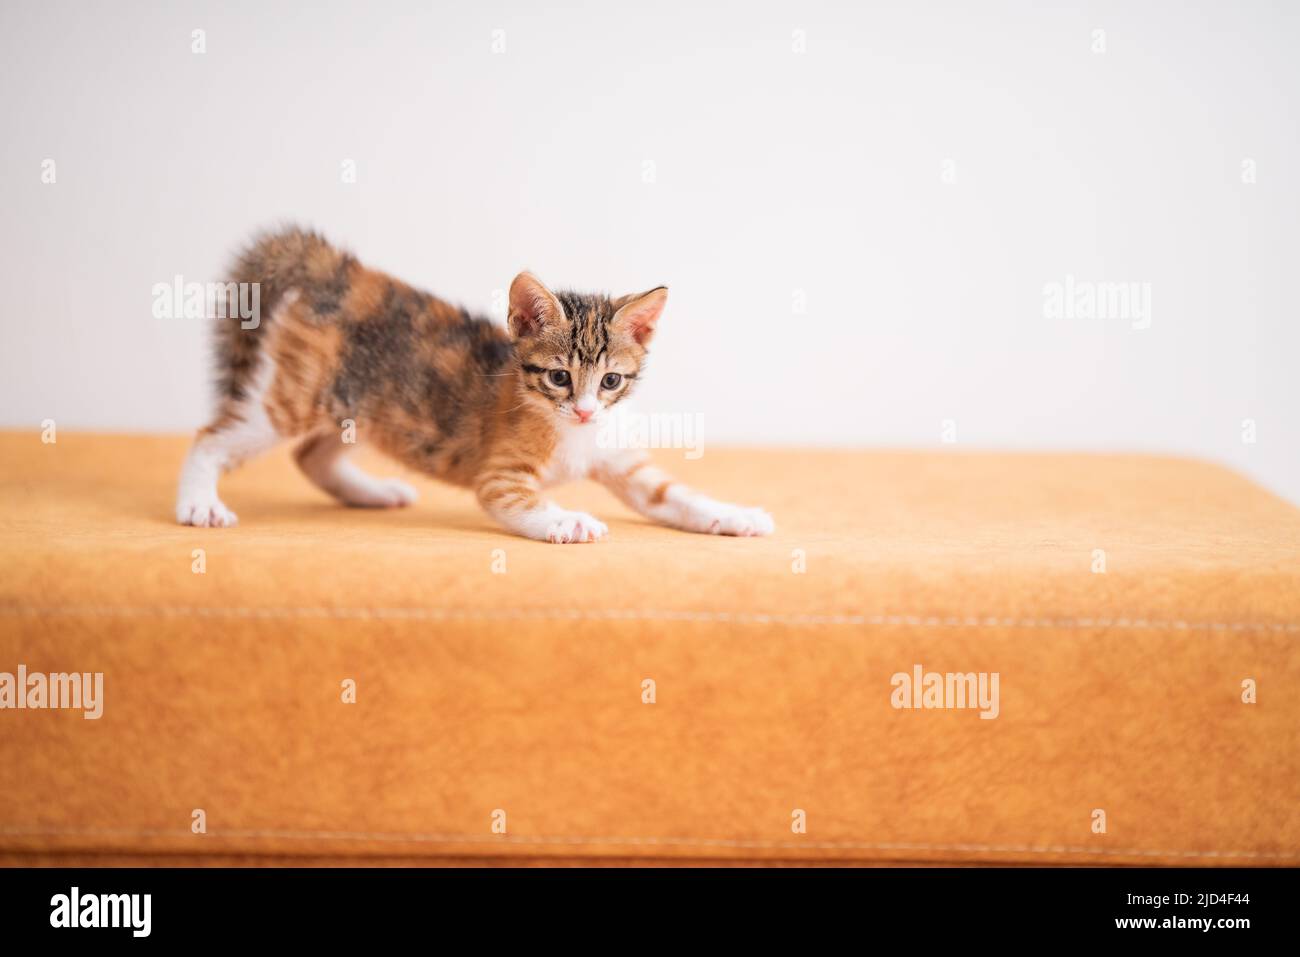 Tabby kitten with fluffed up tail scared portrait Stock Photo